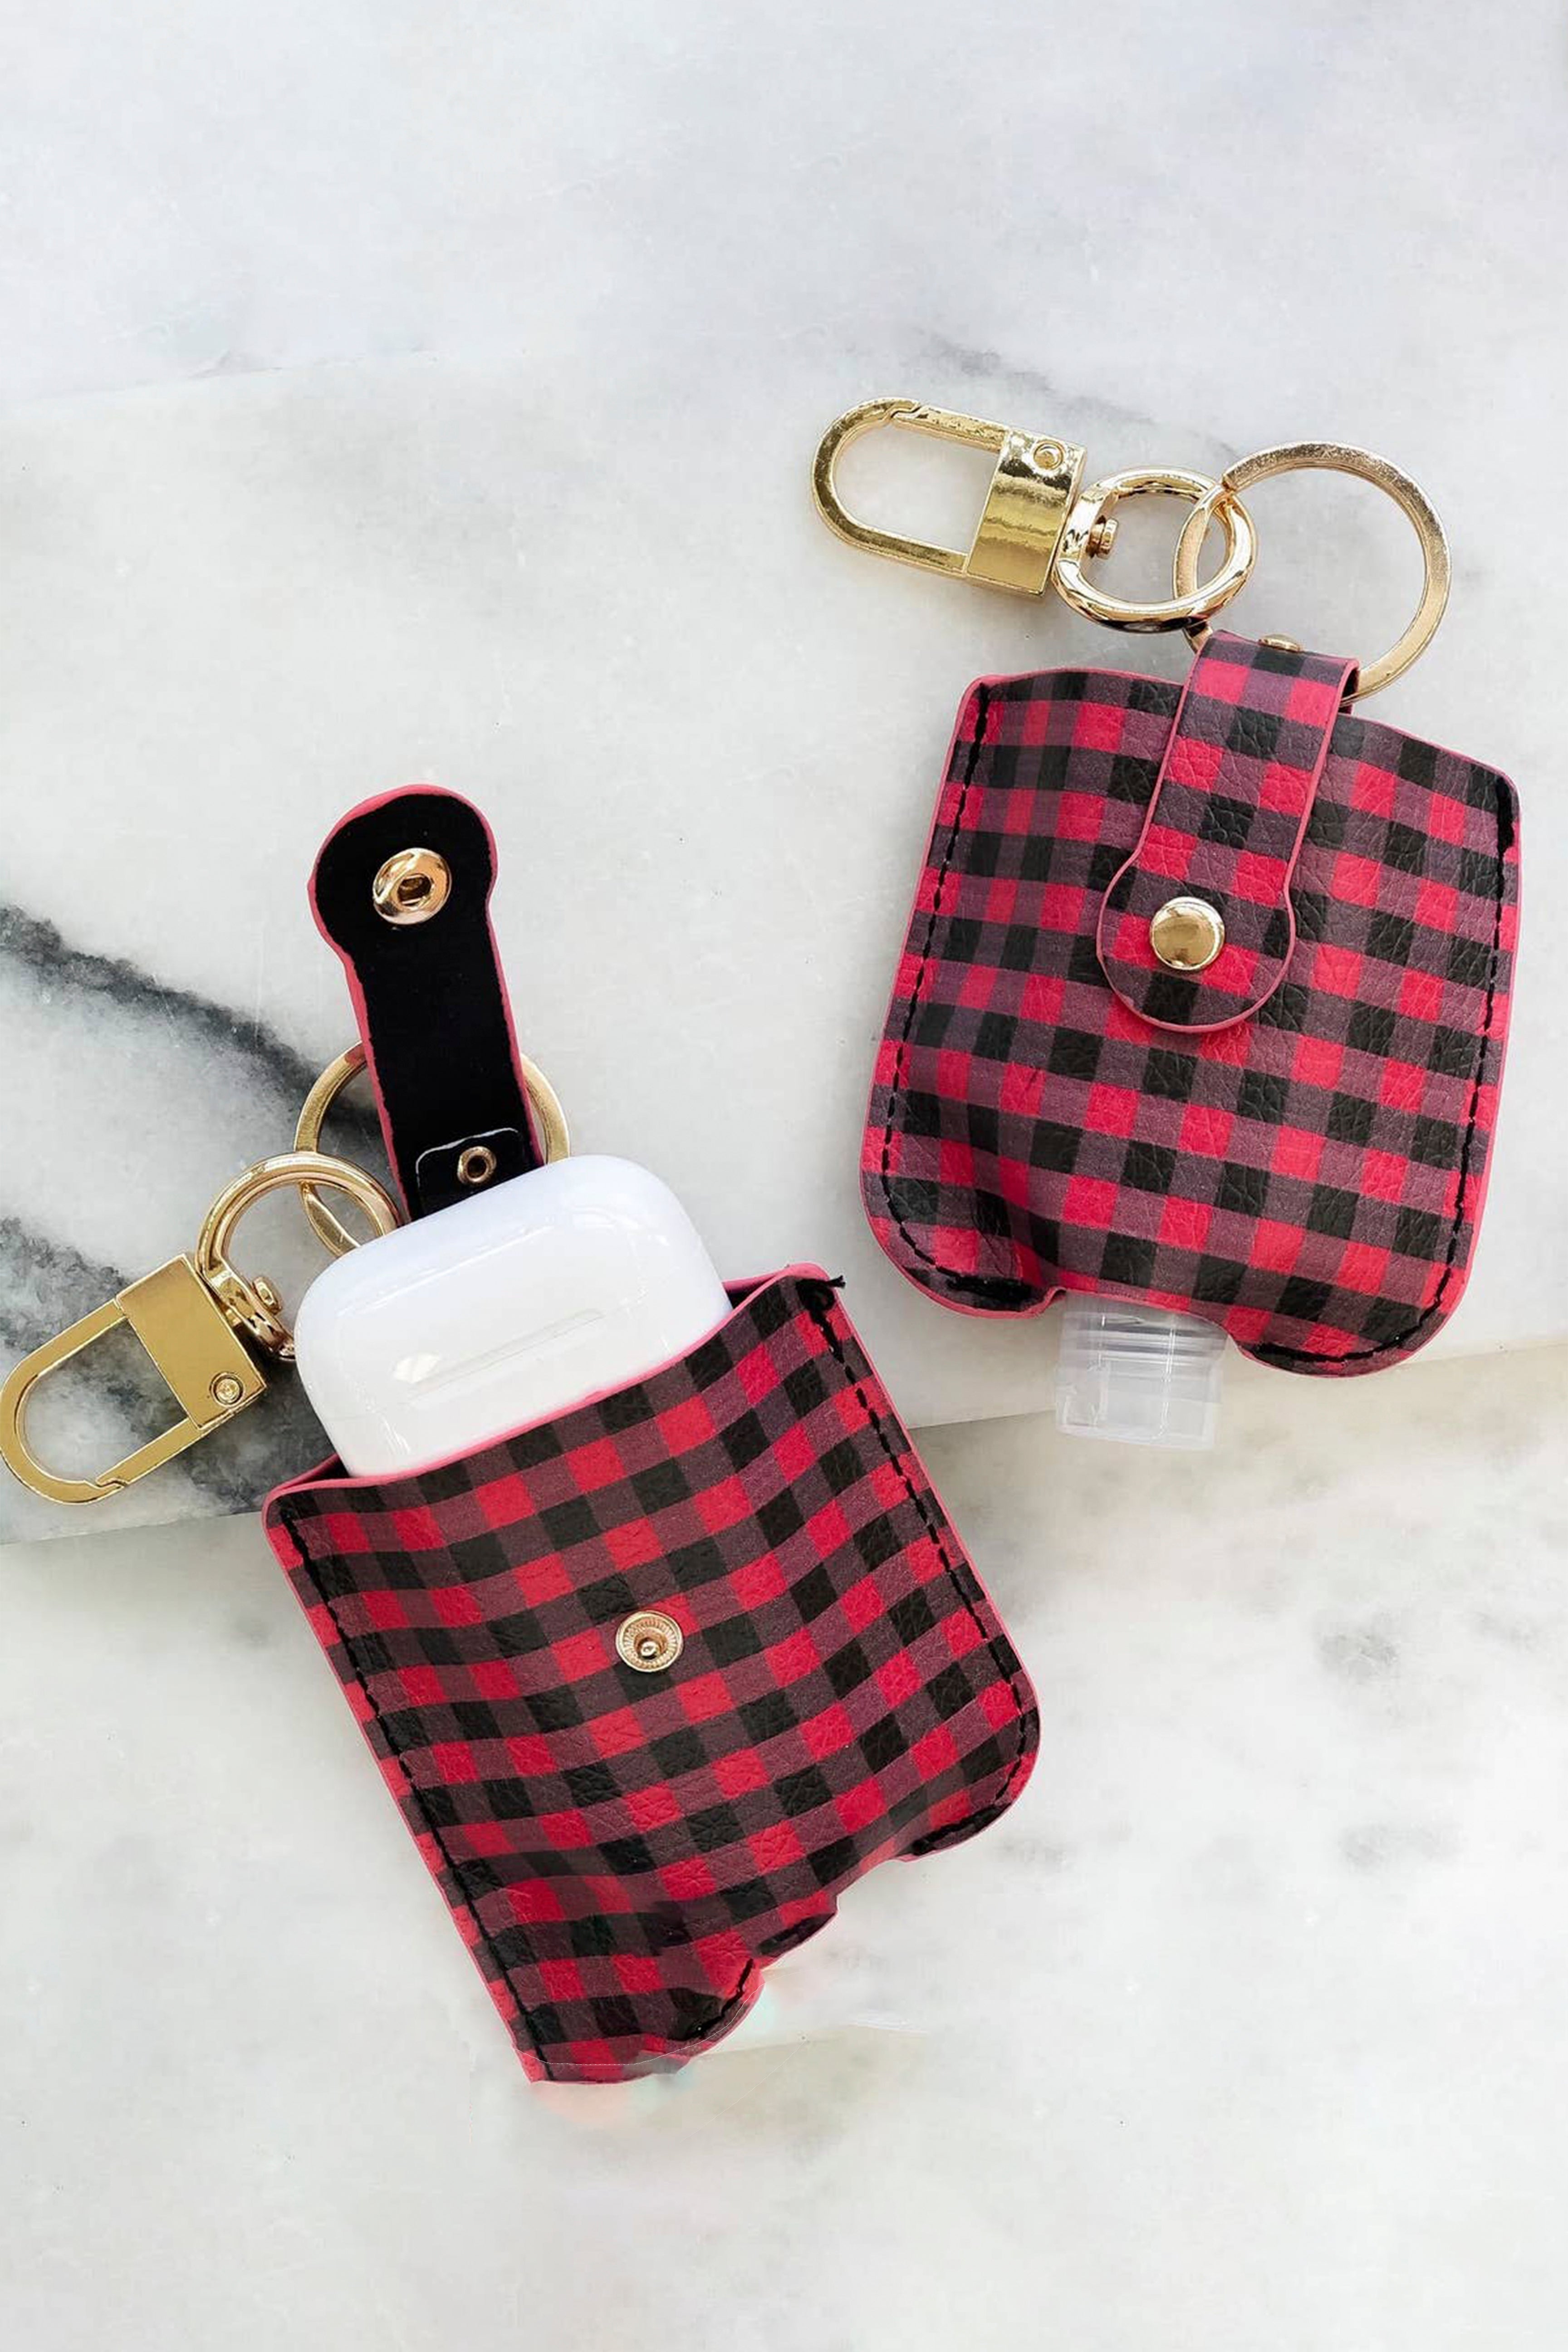 Sensible Solutions Women's Jet Faux Leather Sanitizer Case Bag Charm with Key  Chain with Prefilled Sanitizer for Everyday Use. Exclusive to Walmart. -  Walmart.com